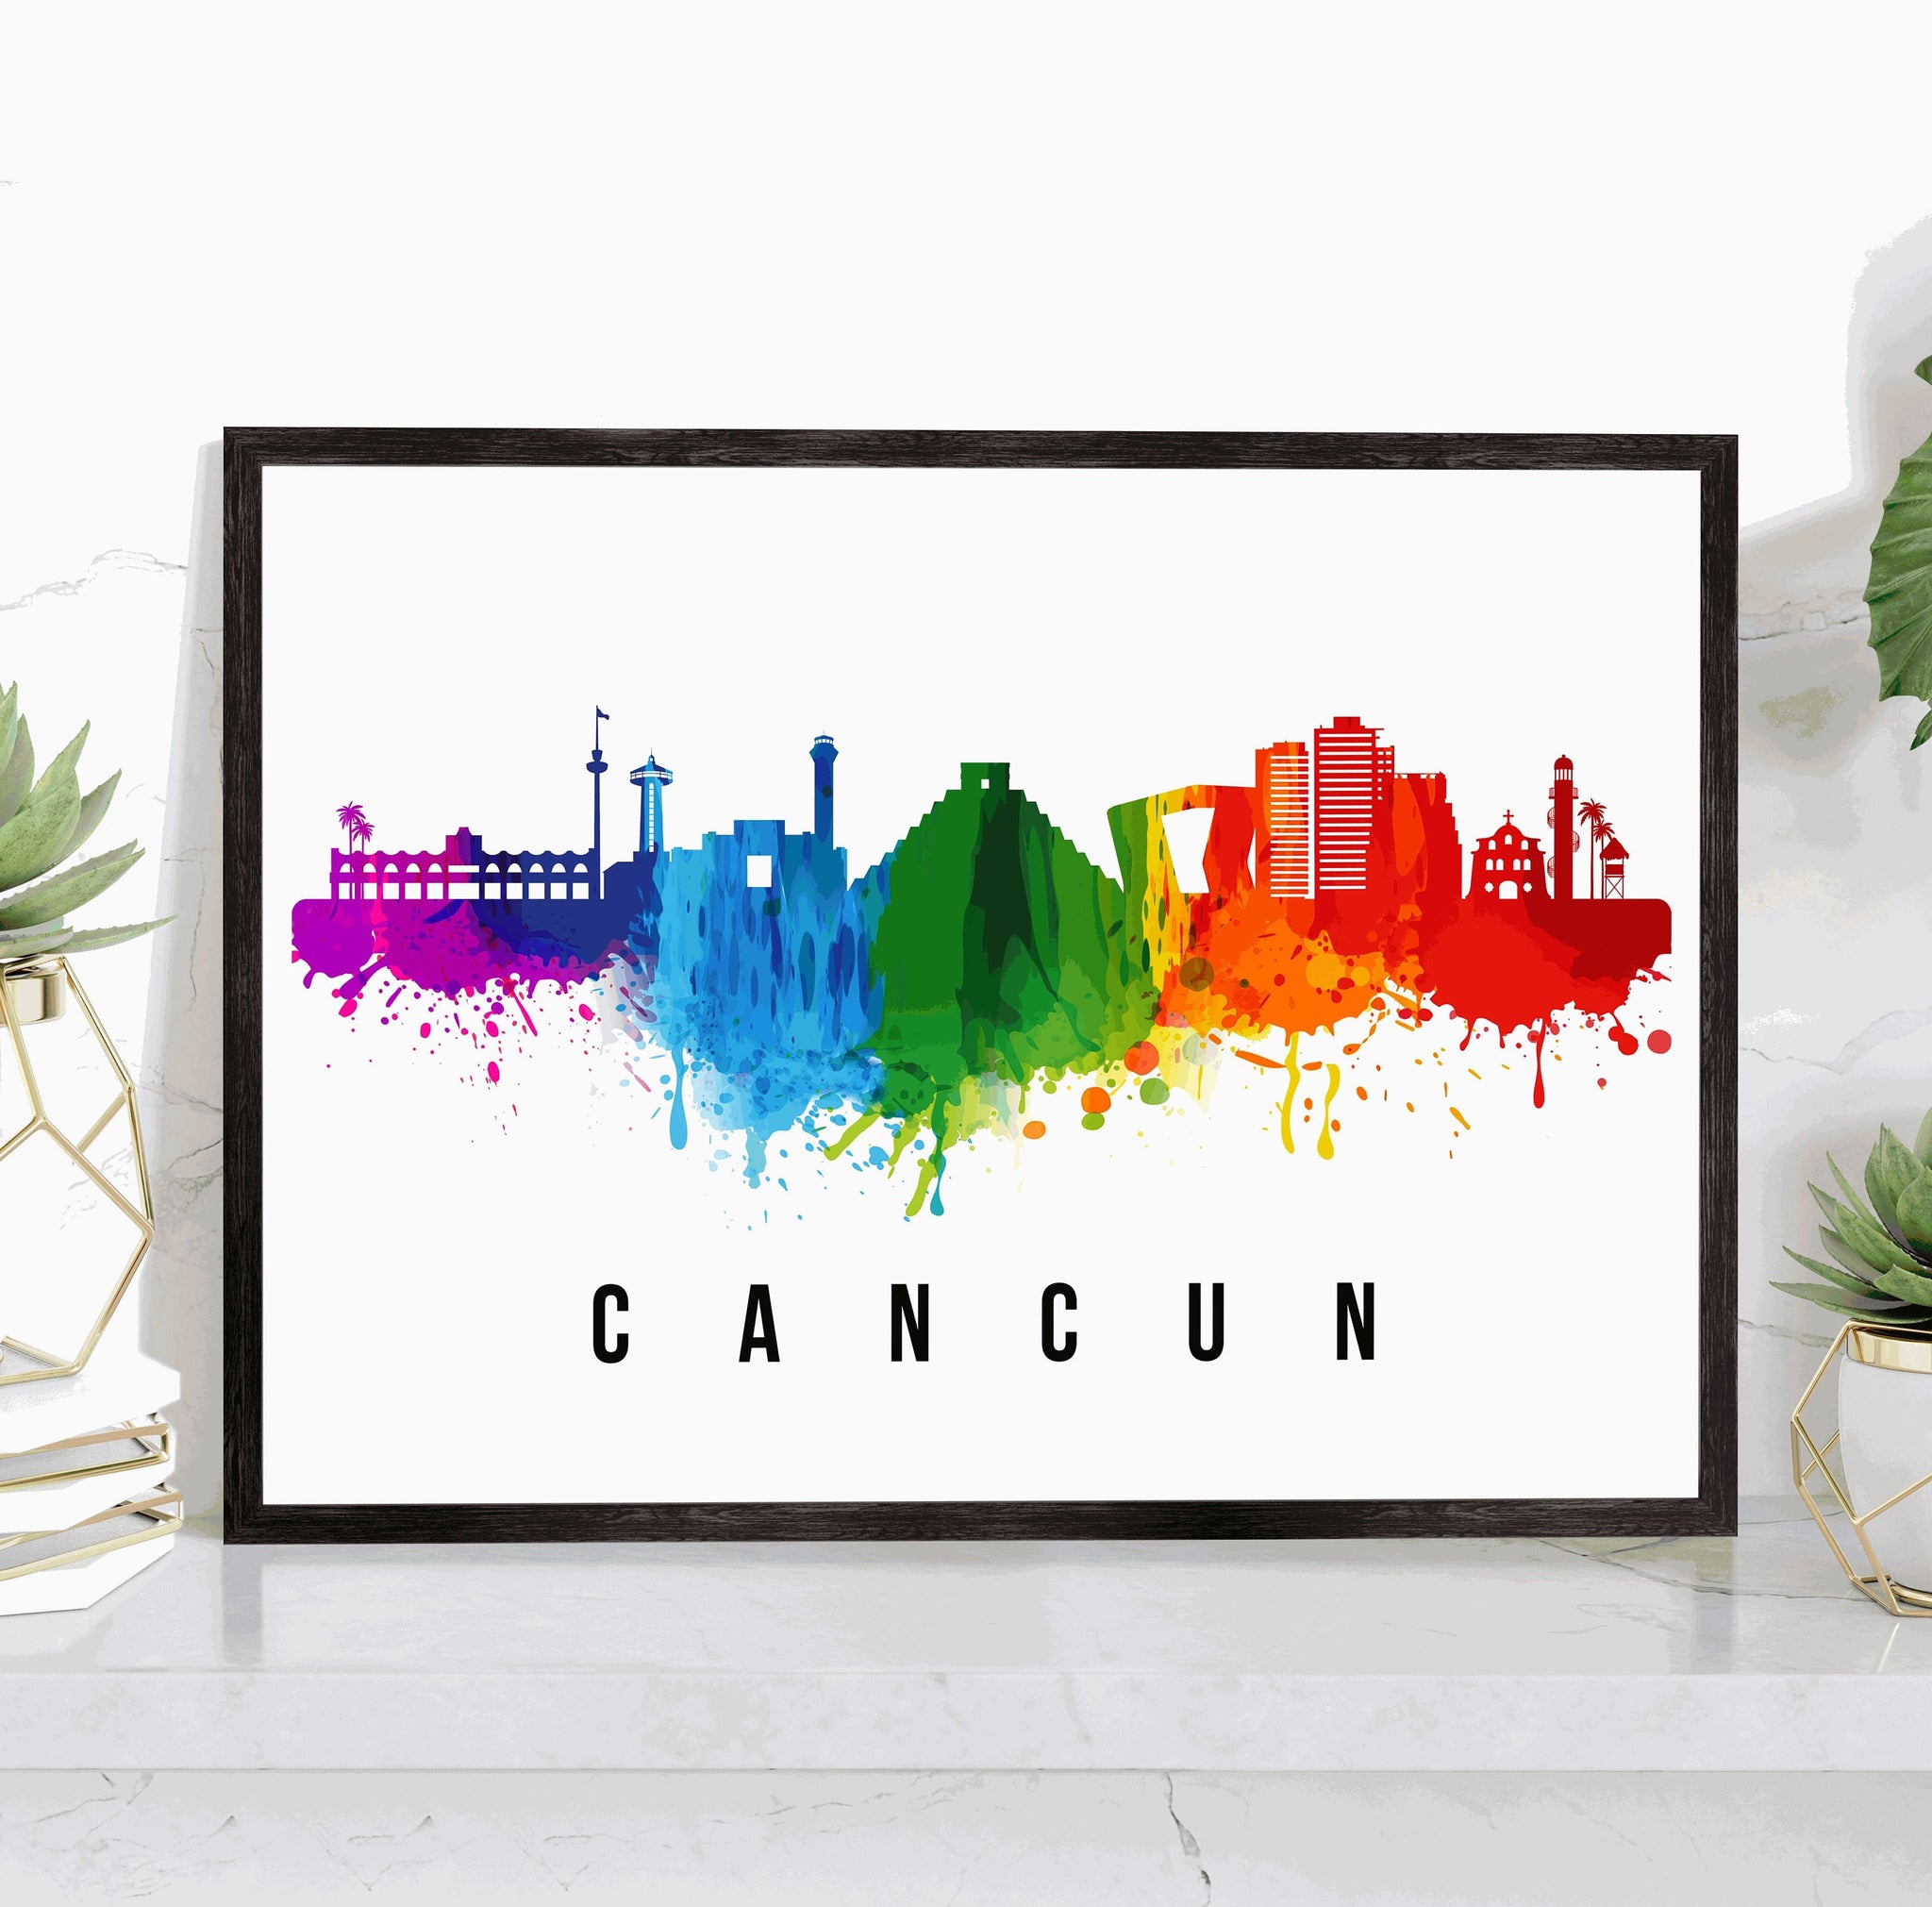 CANCUN - MEXICO  Poster, Skyline Poster Cityscape and Landmark Cancun City Illustration Home Wall Art, Office Decor